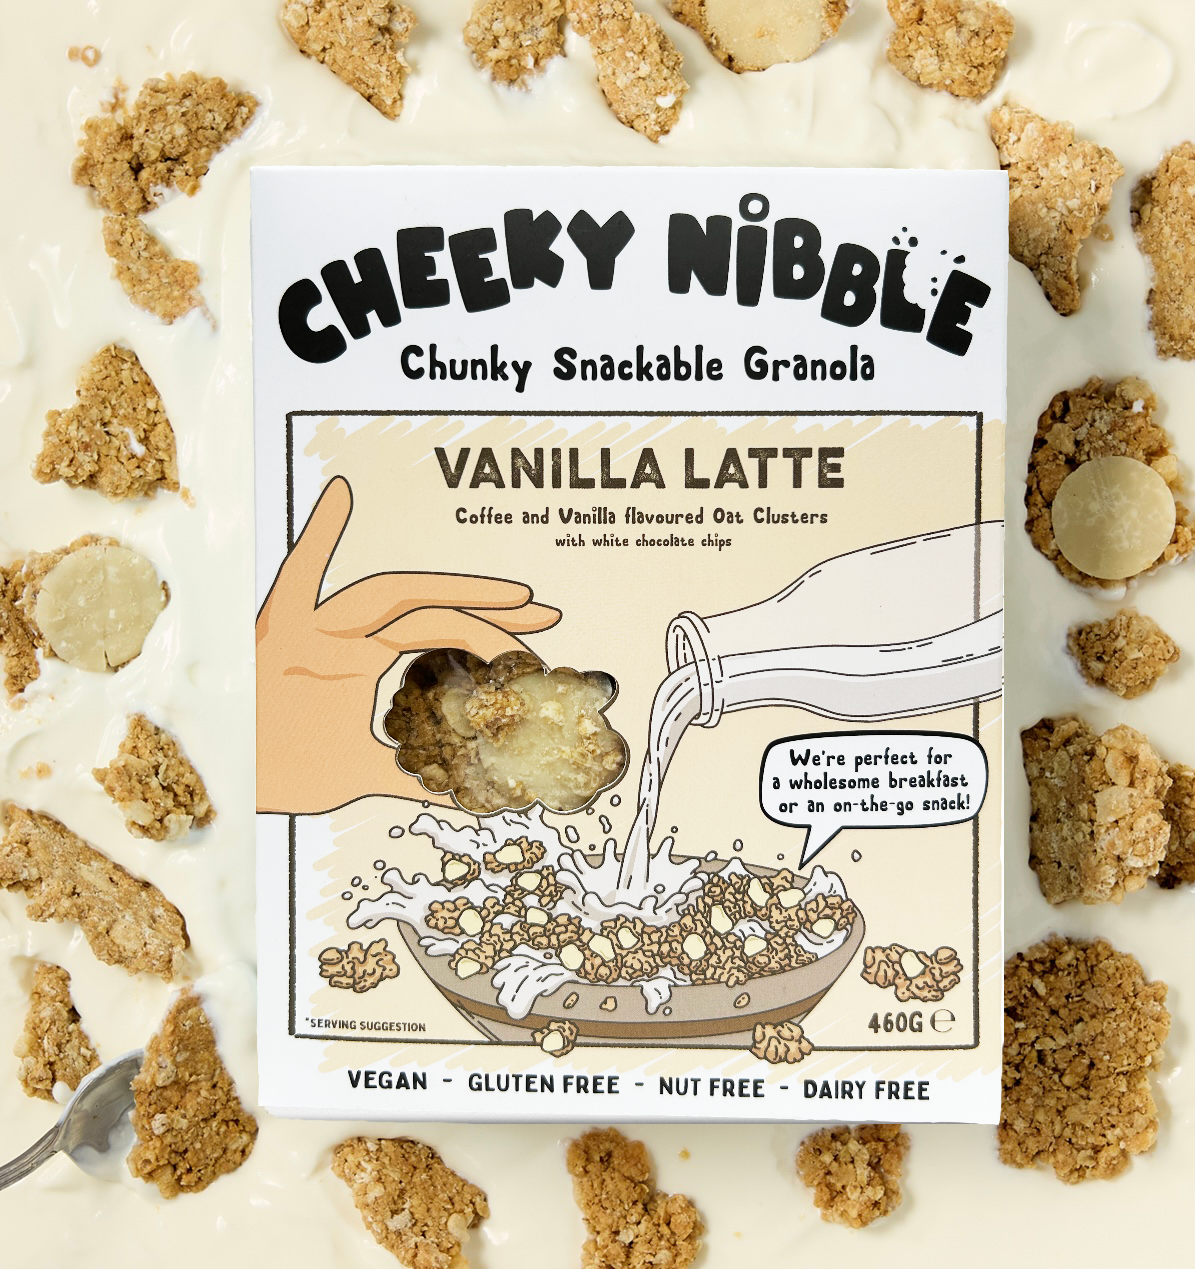  A box of Vanilla Latte-flavored chunky granola is depicted, featuring an enticing image of the granola bathed in creamy thick yogurt. The granola chunks are generously coated with white chocolate, vanilla, and coffee flavors, creating a visually appealing breakfast or snack option. The background suggests a cozy café setting, with hints of coffee beans and swirling latte art, enhancing the sensory experience.